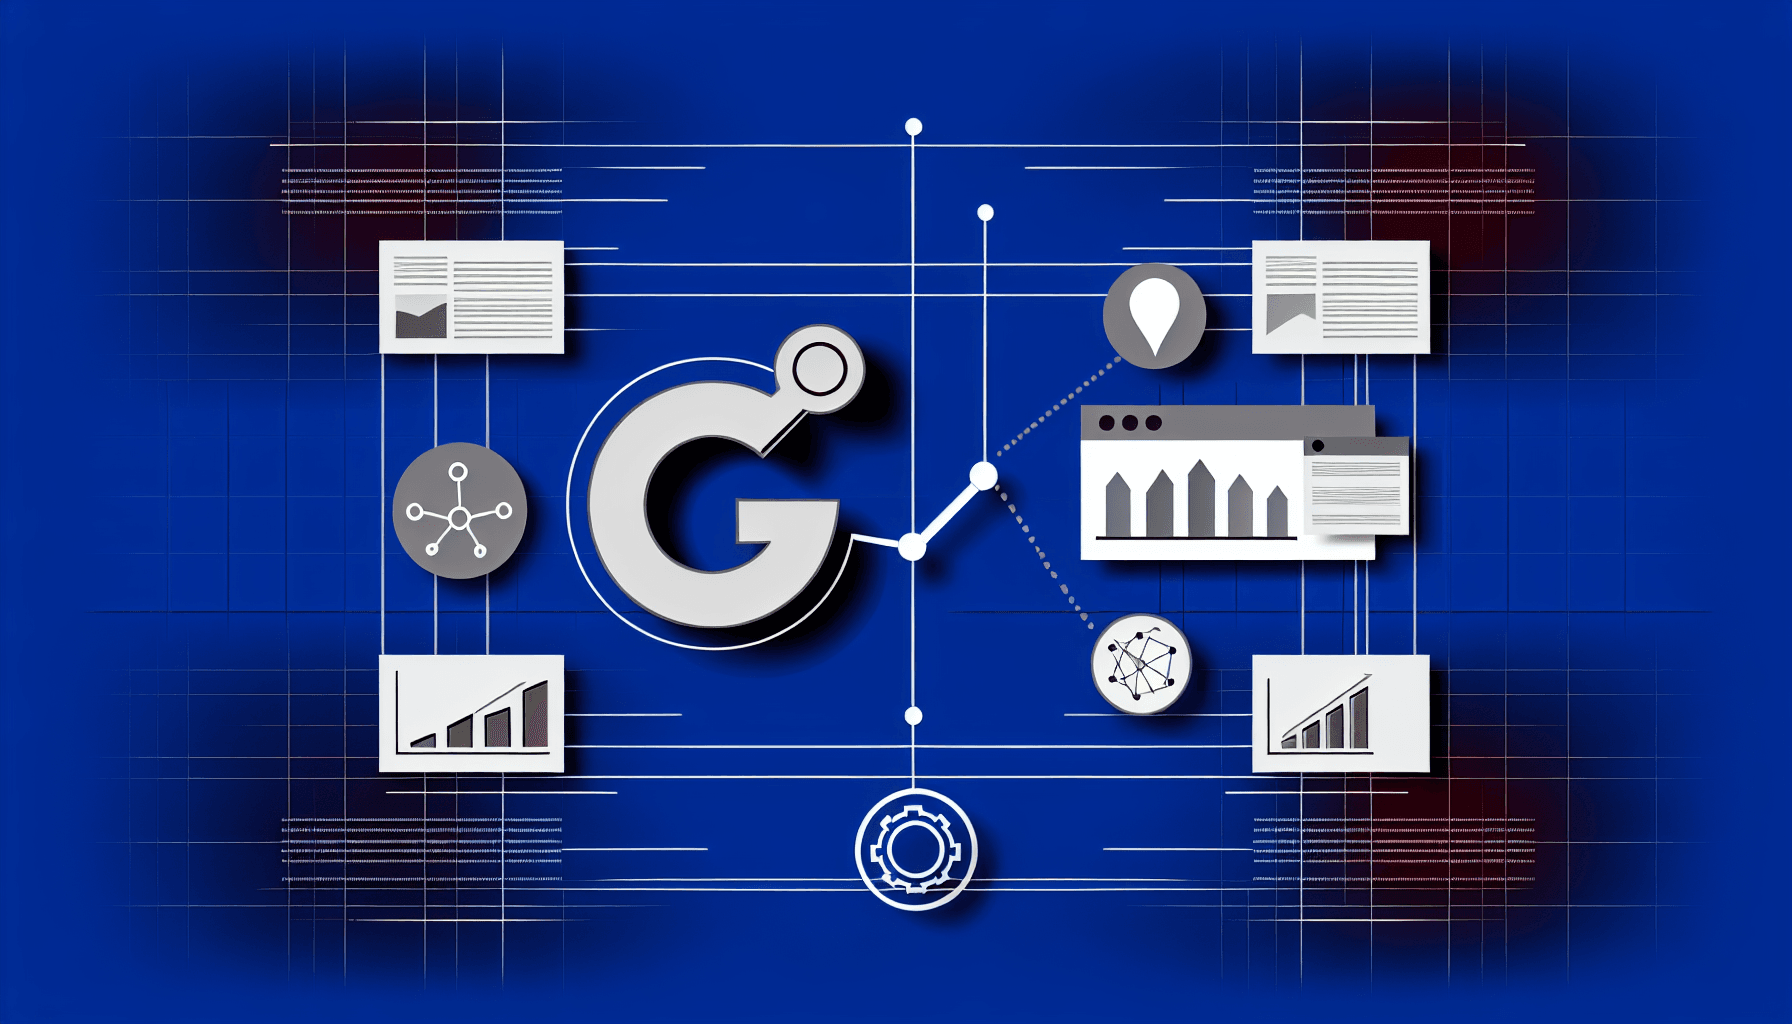 Different ways of how SGE will affect the results of search advertising and other metrics.